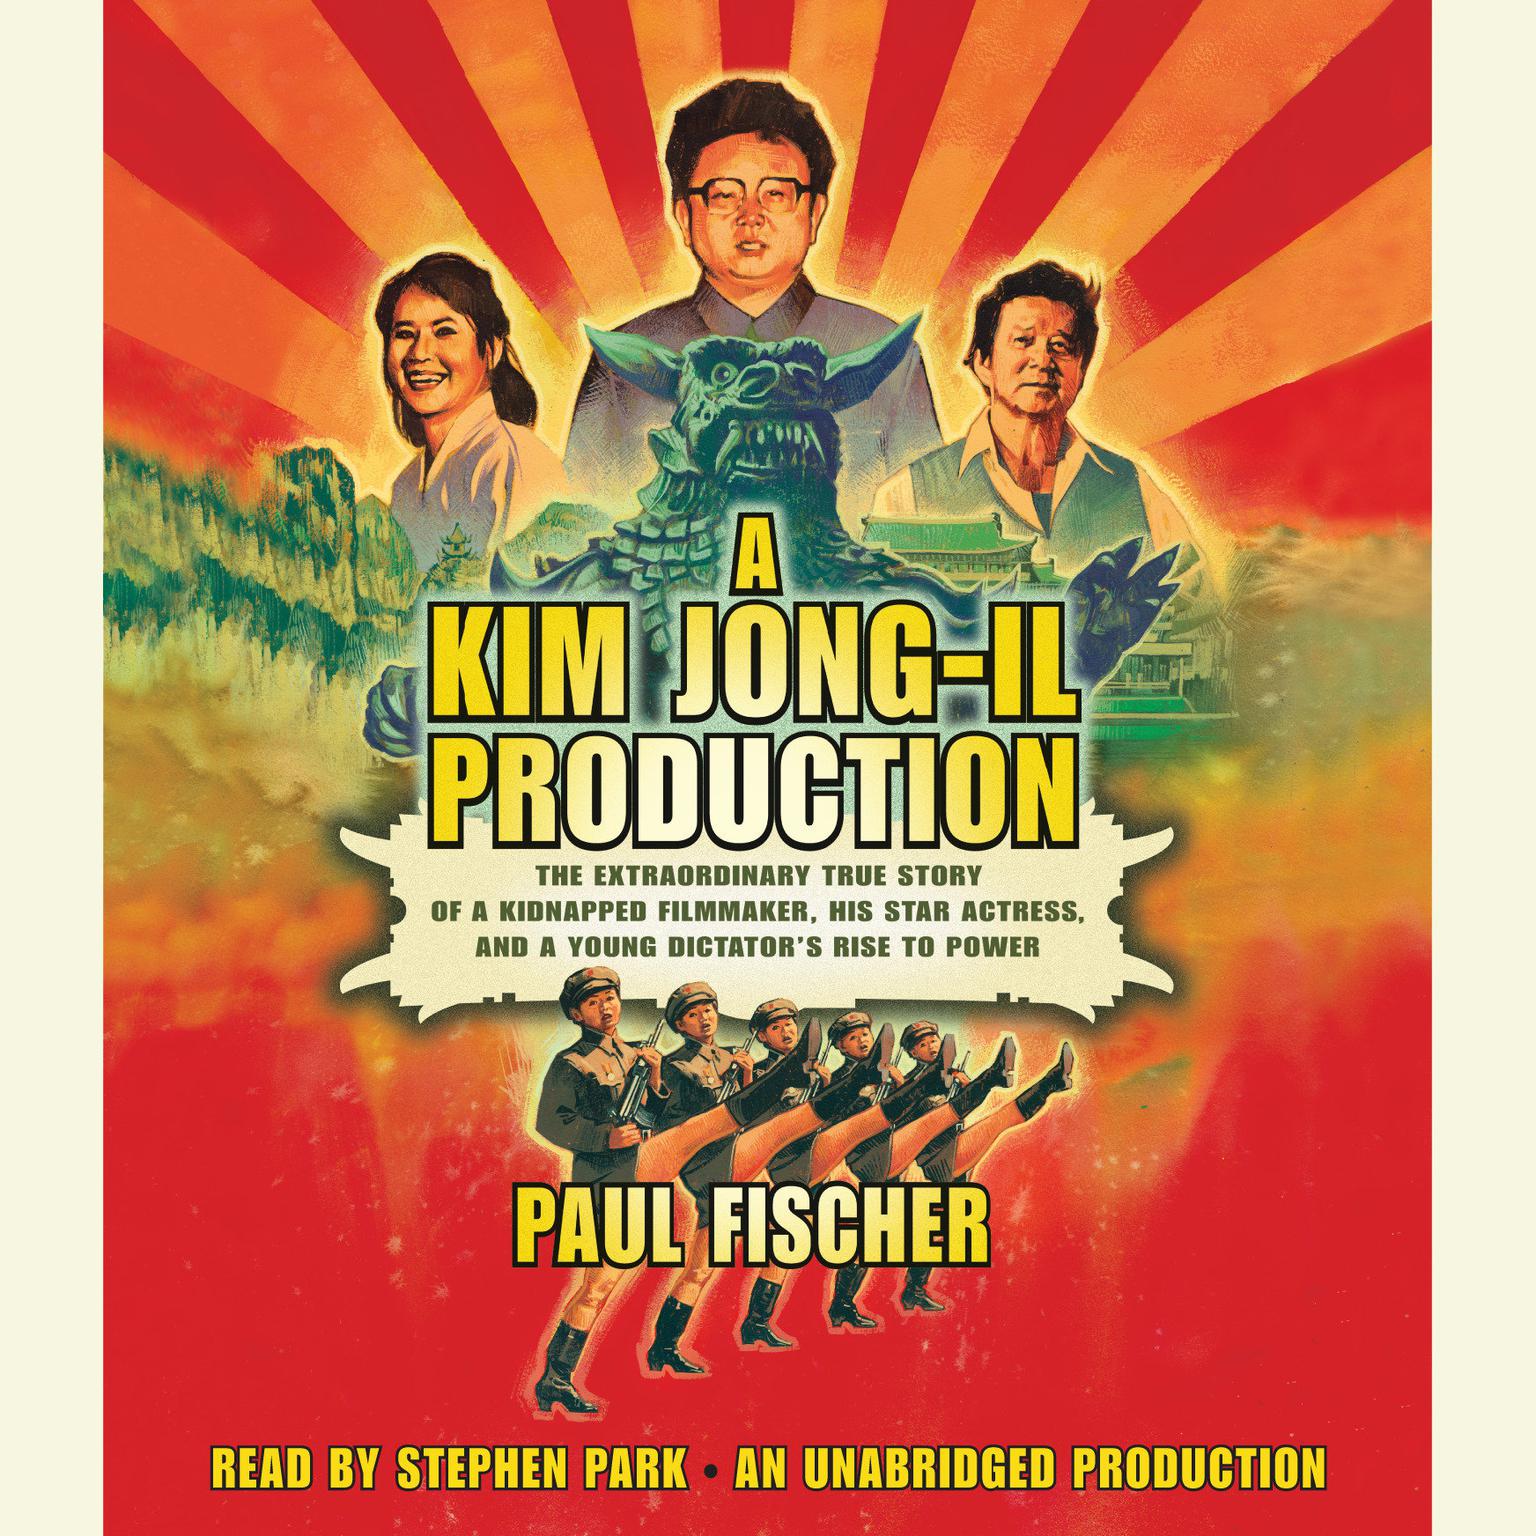 A Kim Jong-Il Production: The Extraordinary True Story of a Kidnapped Filmmaker, His Star Actress, and a Young Dictators Rise to Power Audiobook, by Paul Fischer